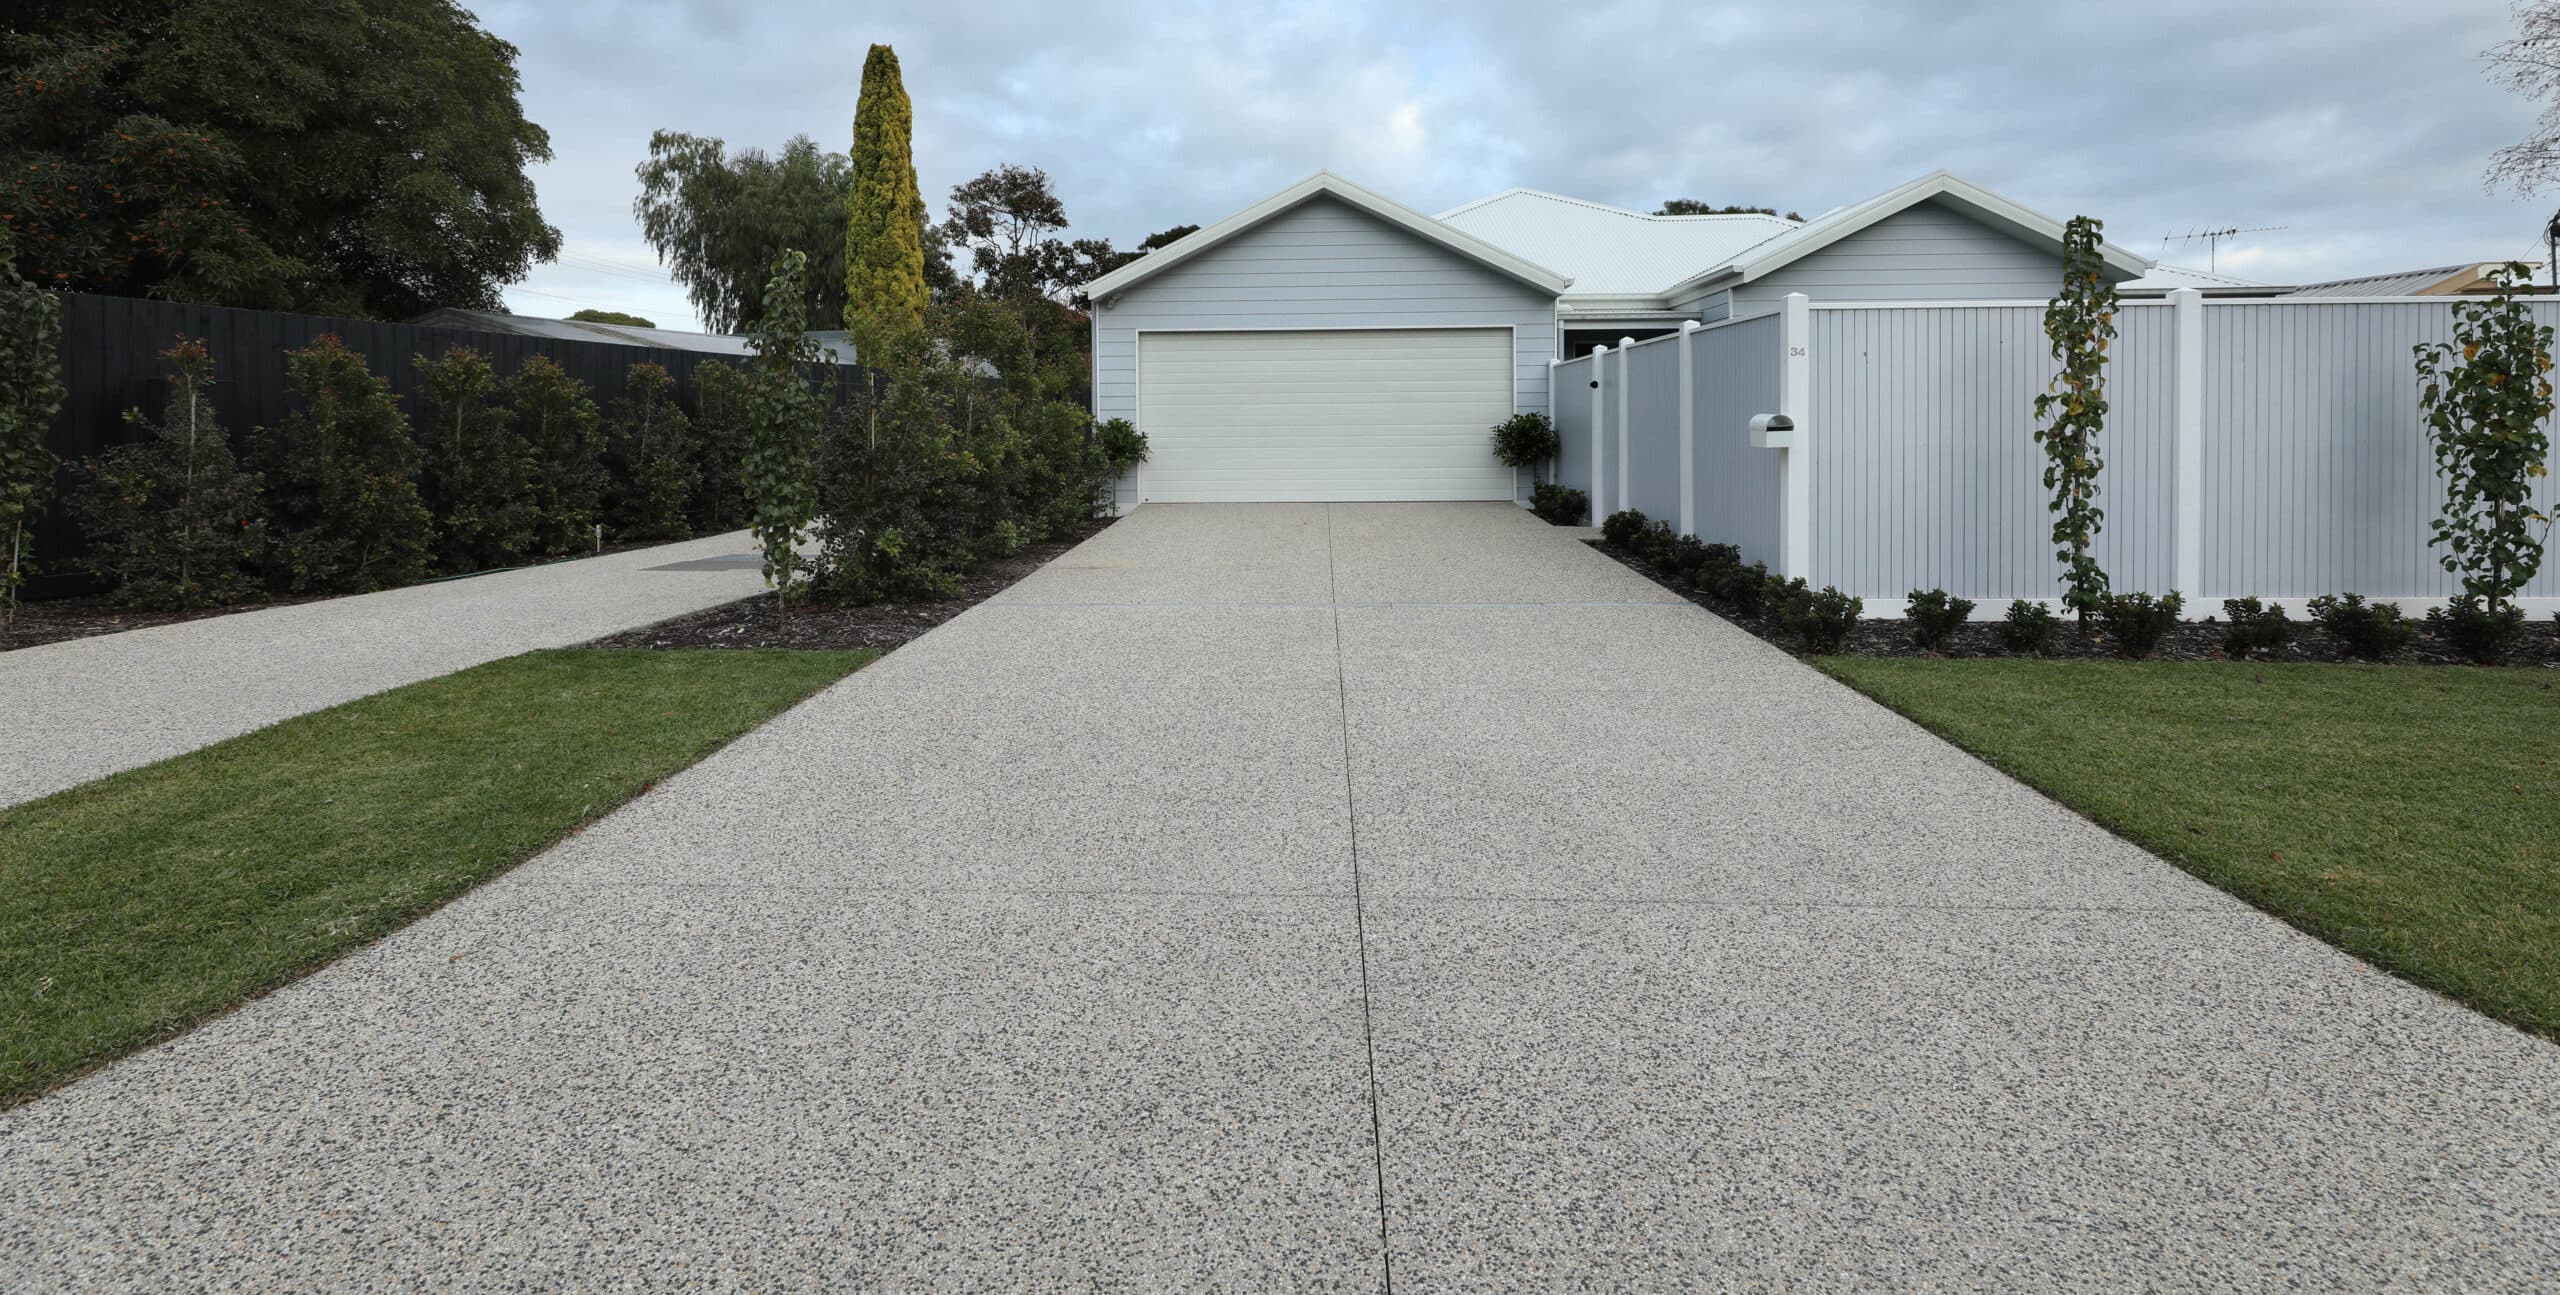 How Much Does a Decorative Concrete Driveway Cost | Holcim Geostone